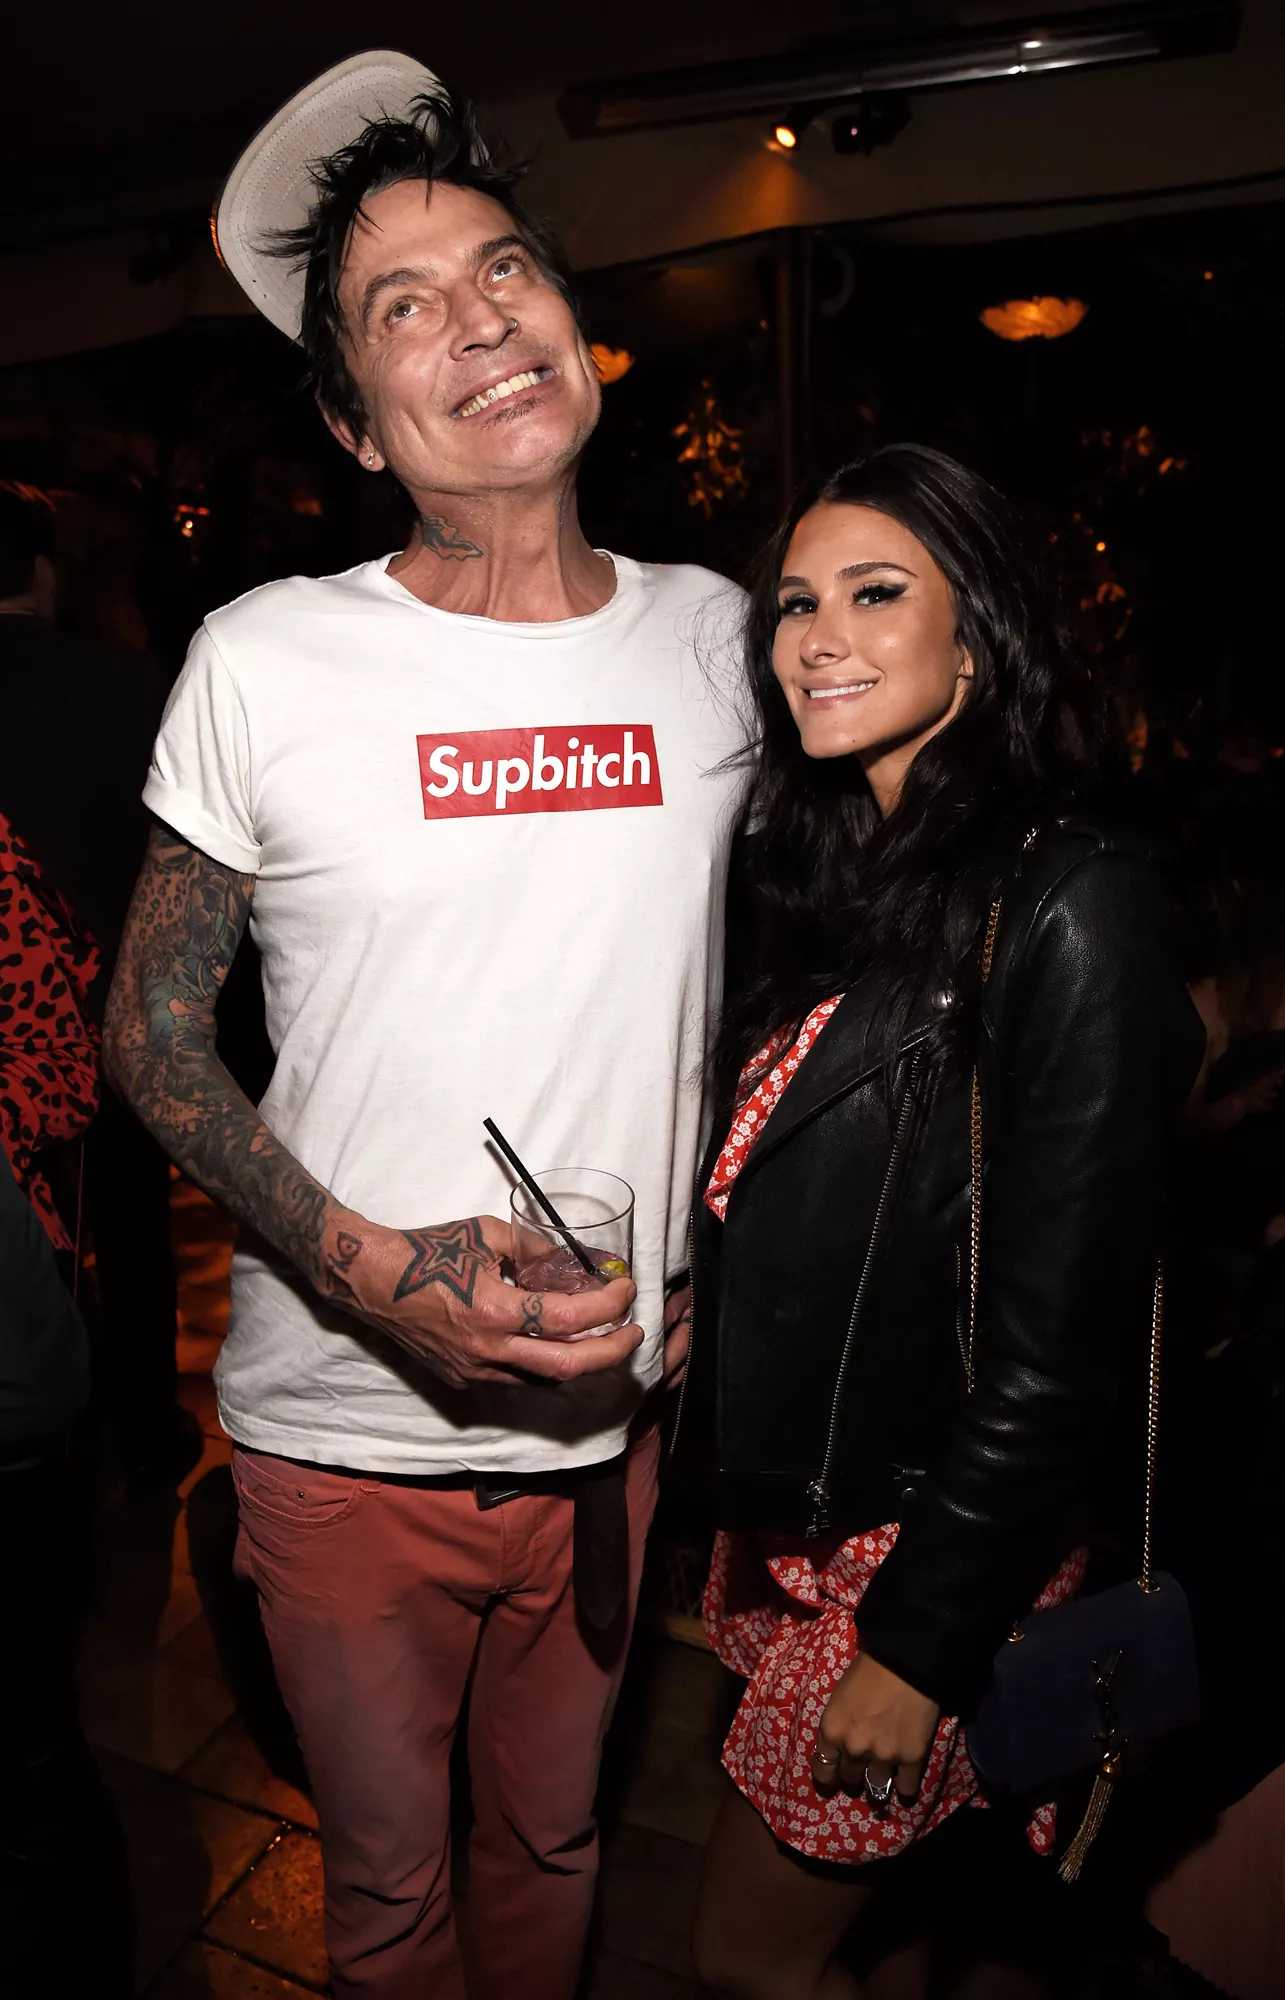 tommy lee children,tommy lee net worth,how old is tommy lees wife,tommy lee age,elaine starchuk,how old is tommy lee&#039;s wife,brittany furlan and tommy lee,tommy lee young,tommy lee and wife 2022,tommy lee and wife 2020,** tommy lee wife 20233,tommy lee and wife 2021,tommy lee wife